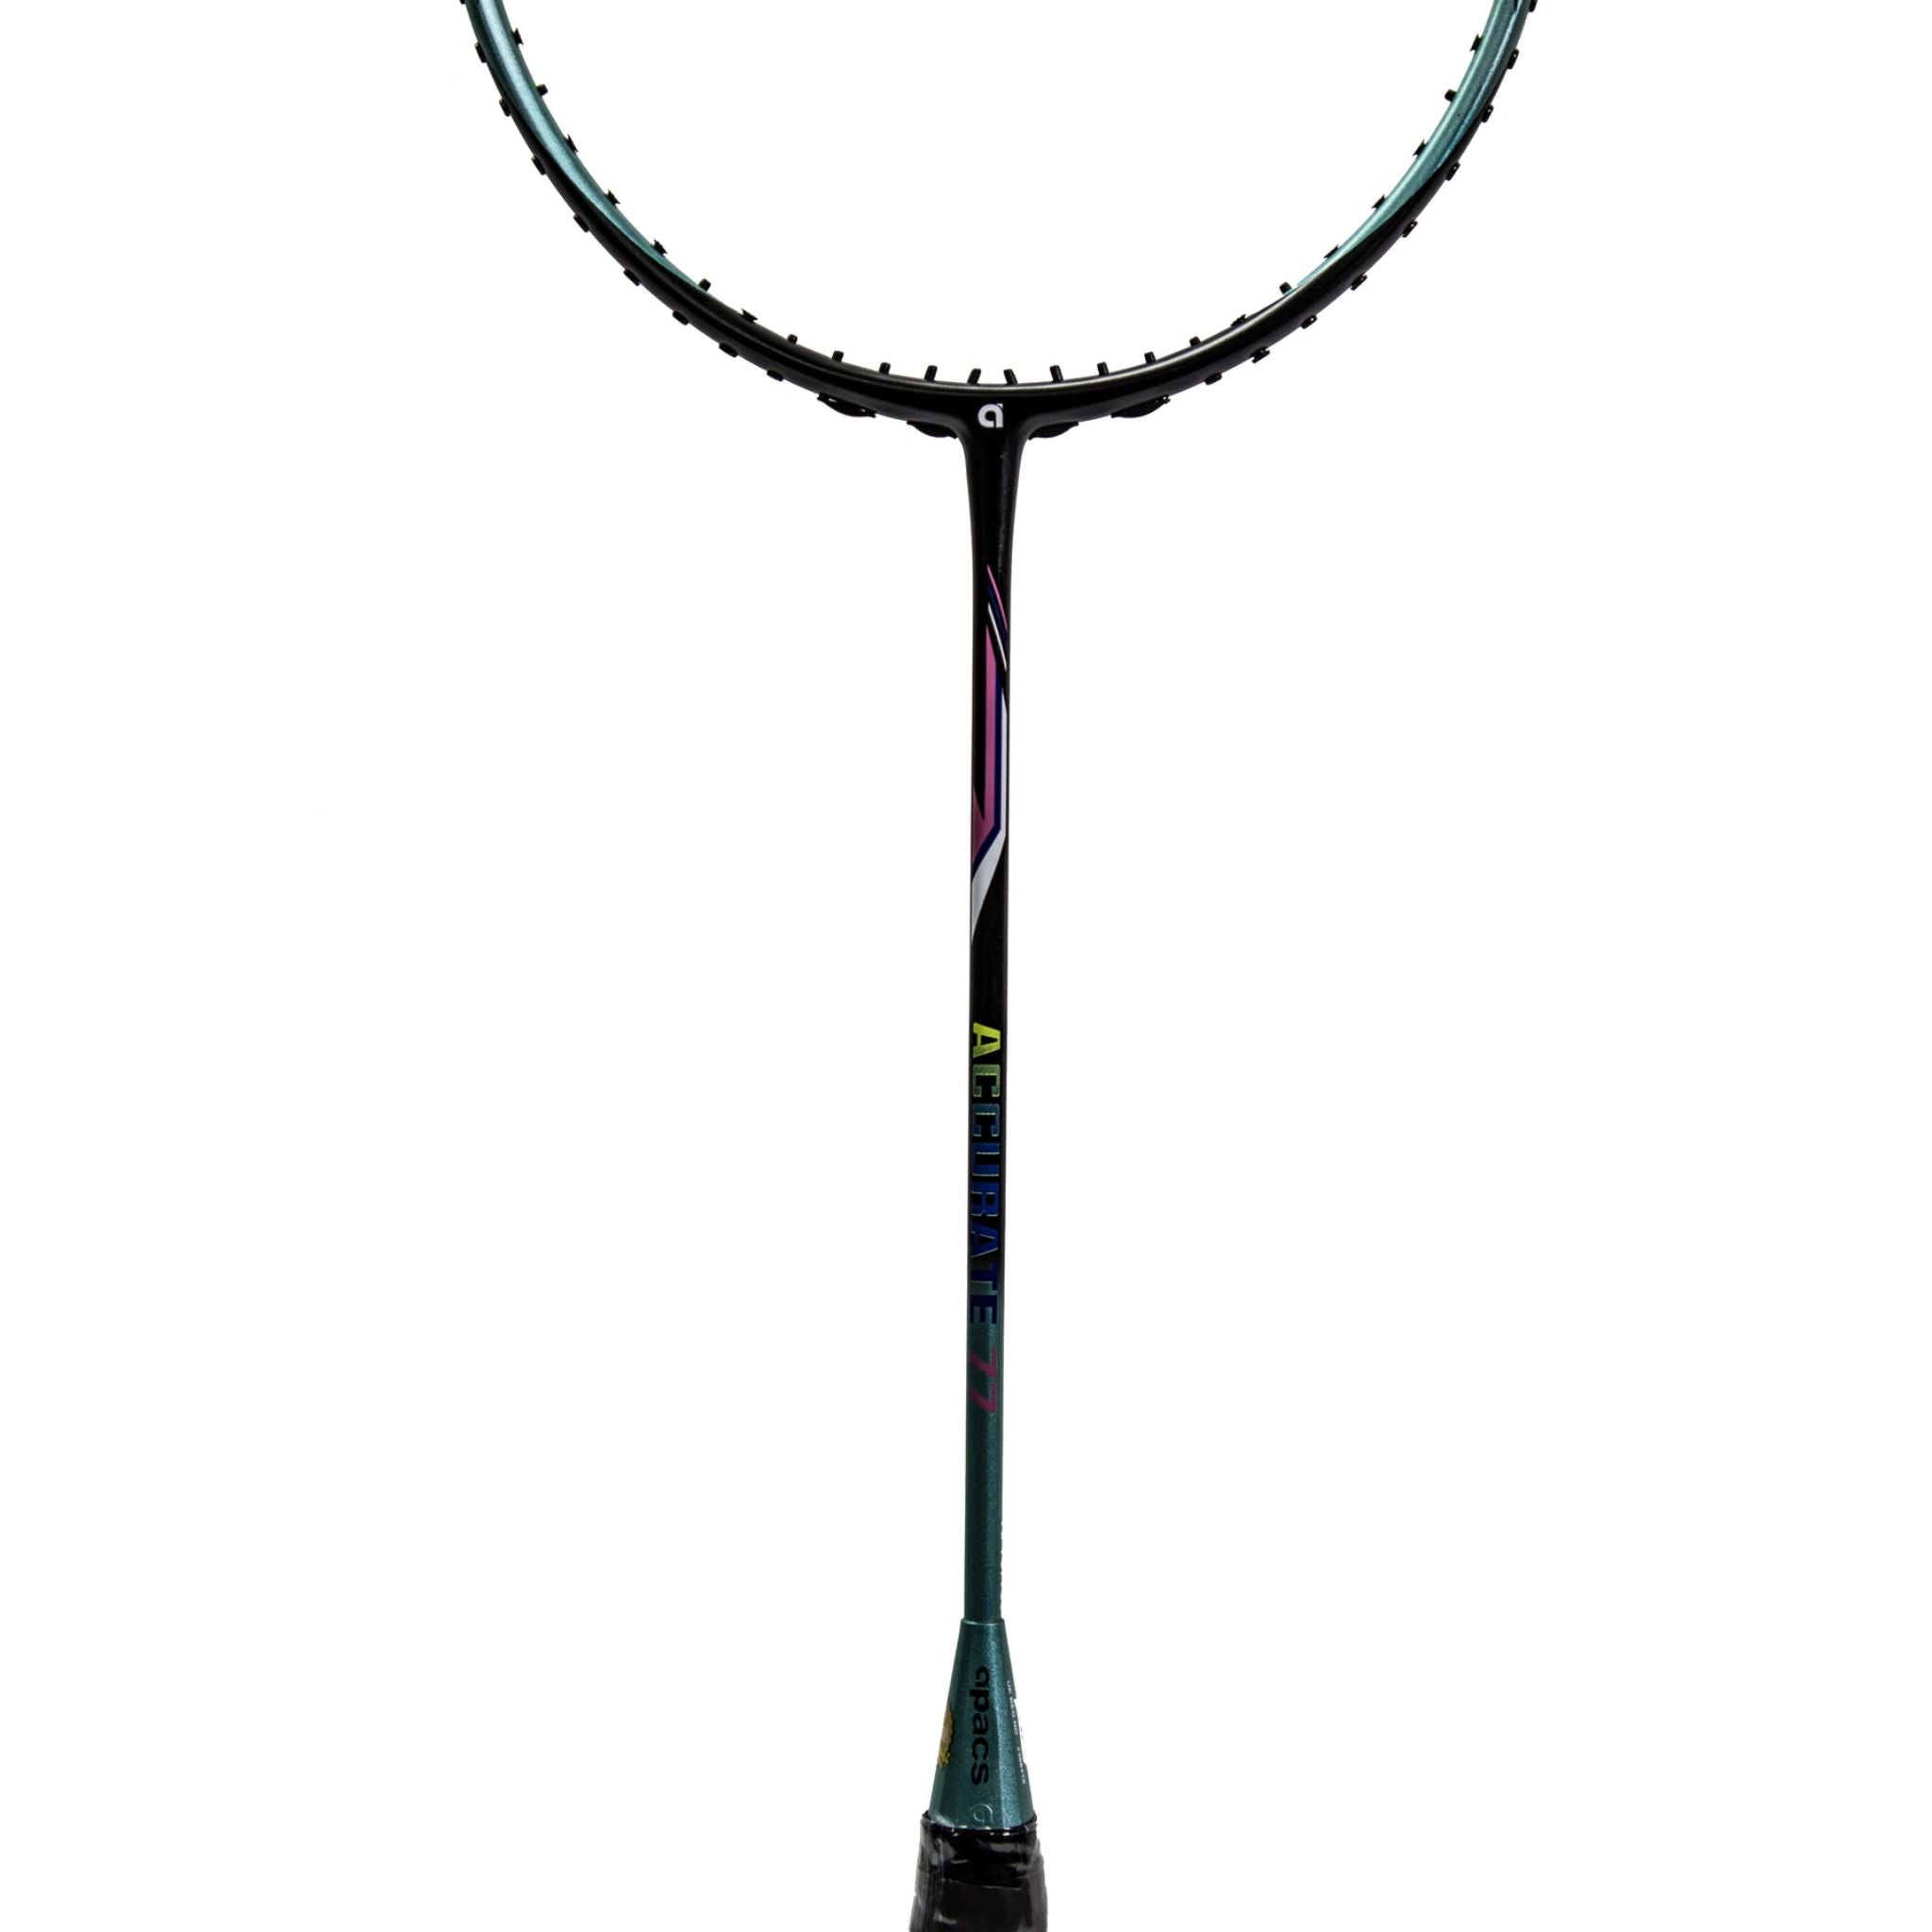 Accurate APACS Badminton - Unmatched Performance with Pinpoint Precision